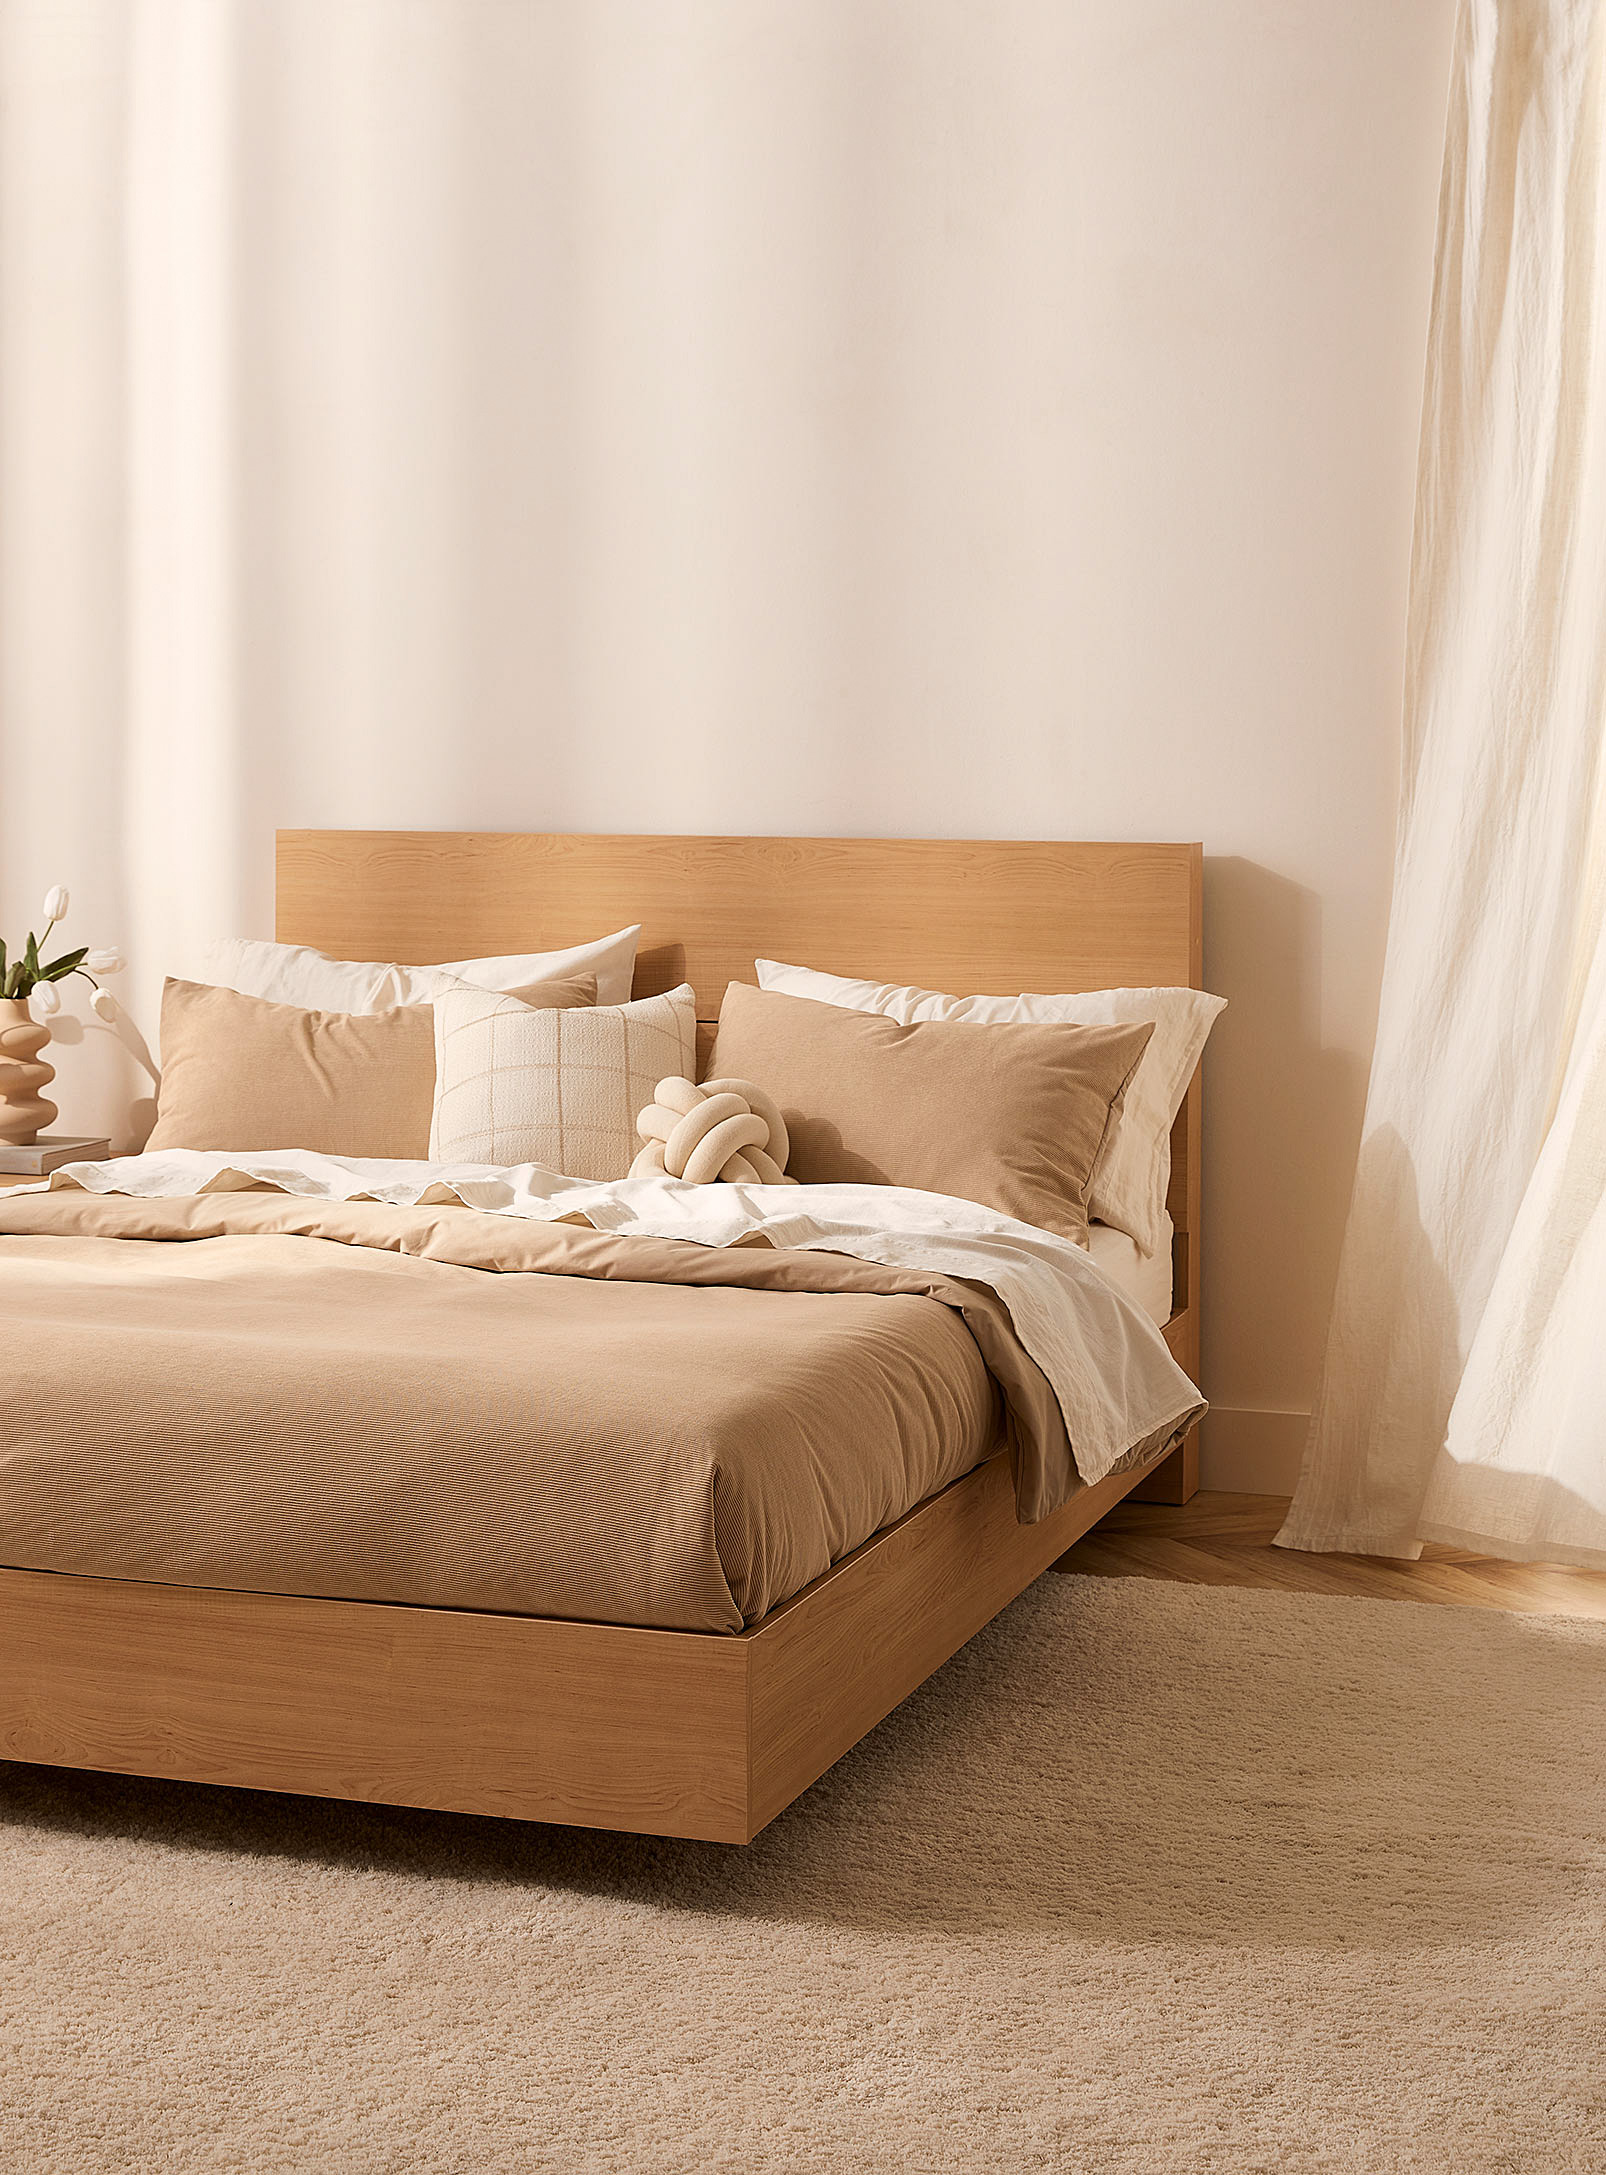 Simons Maison Walnut Wood Bed Frame 2-piece Set Suitable For A Double Mattress In Sand